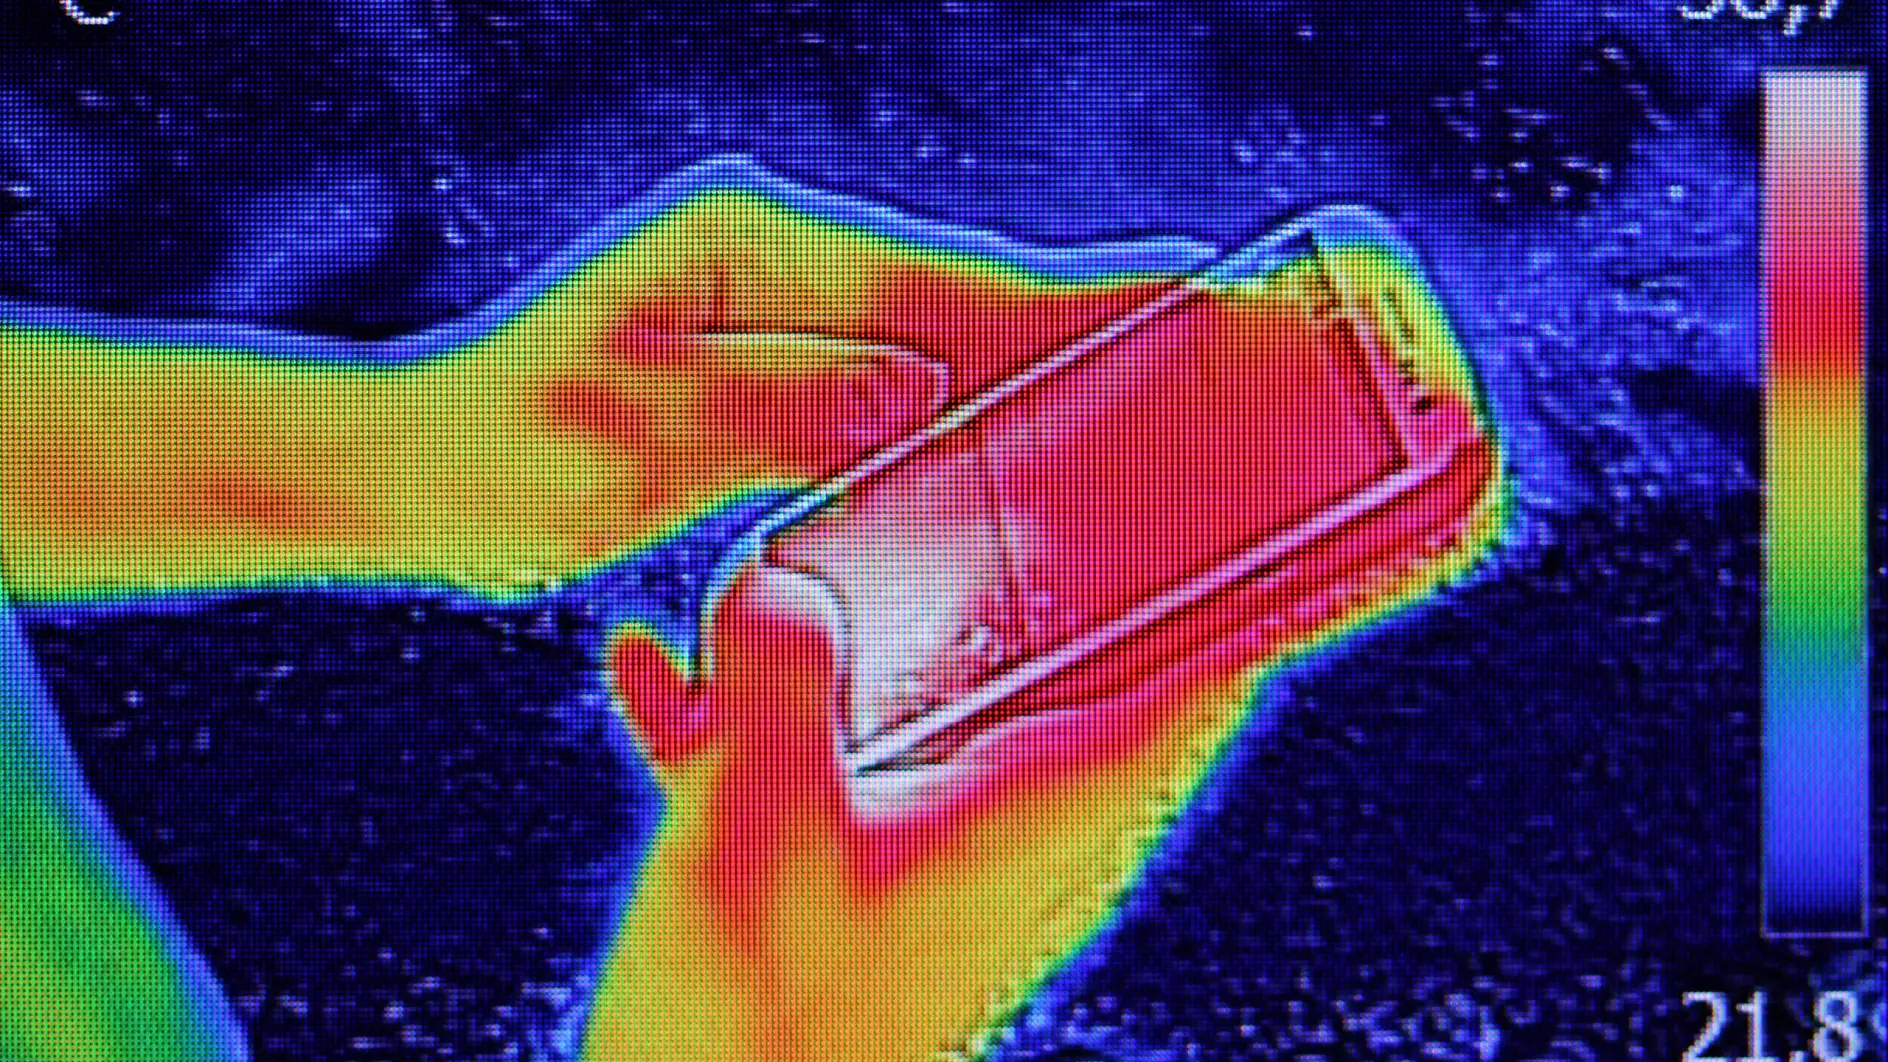 Infrared thermography image showing the heat emission when Young girl used smartphone or cell phone